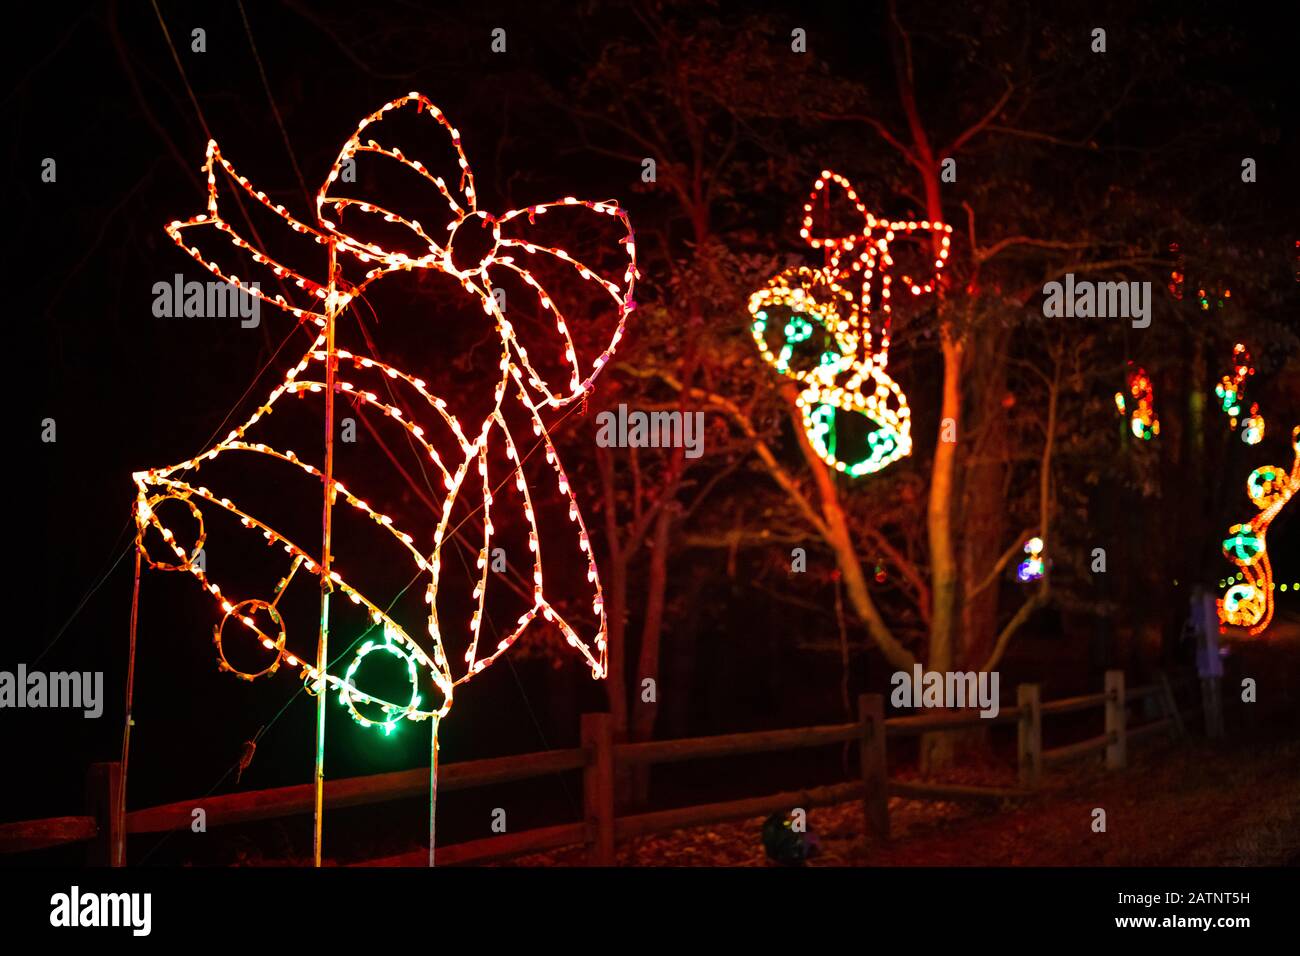 Christmas lights decoration bells on the trees Stock Photo